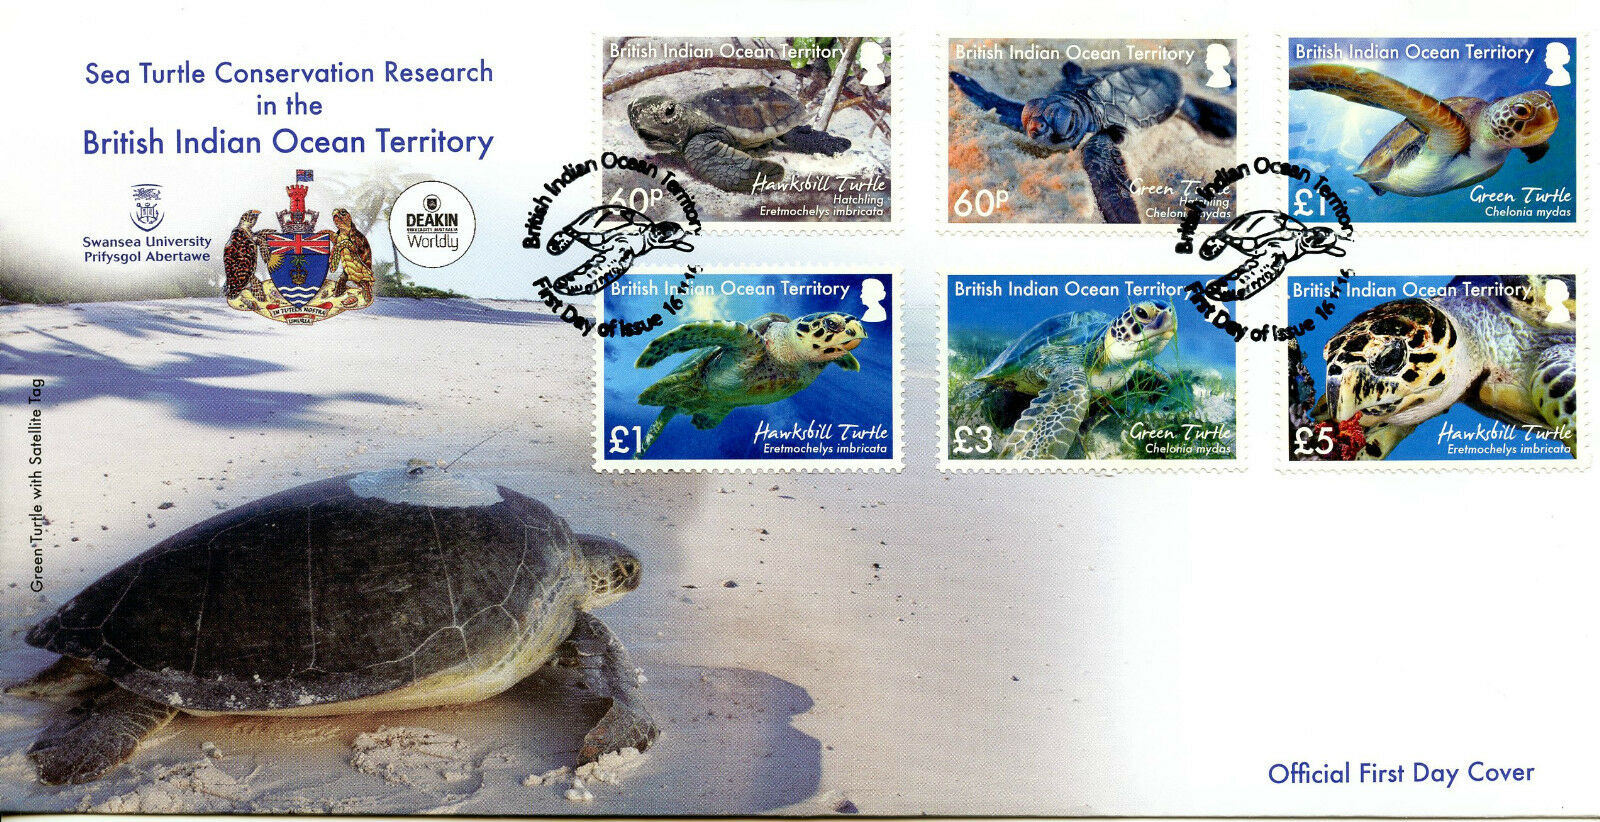 Brit Indian Ocean Ter BIOT 2016 FDC Sea Turtle Research 6v Cover Turtles Stamps